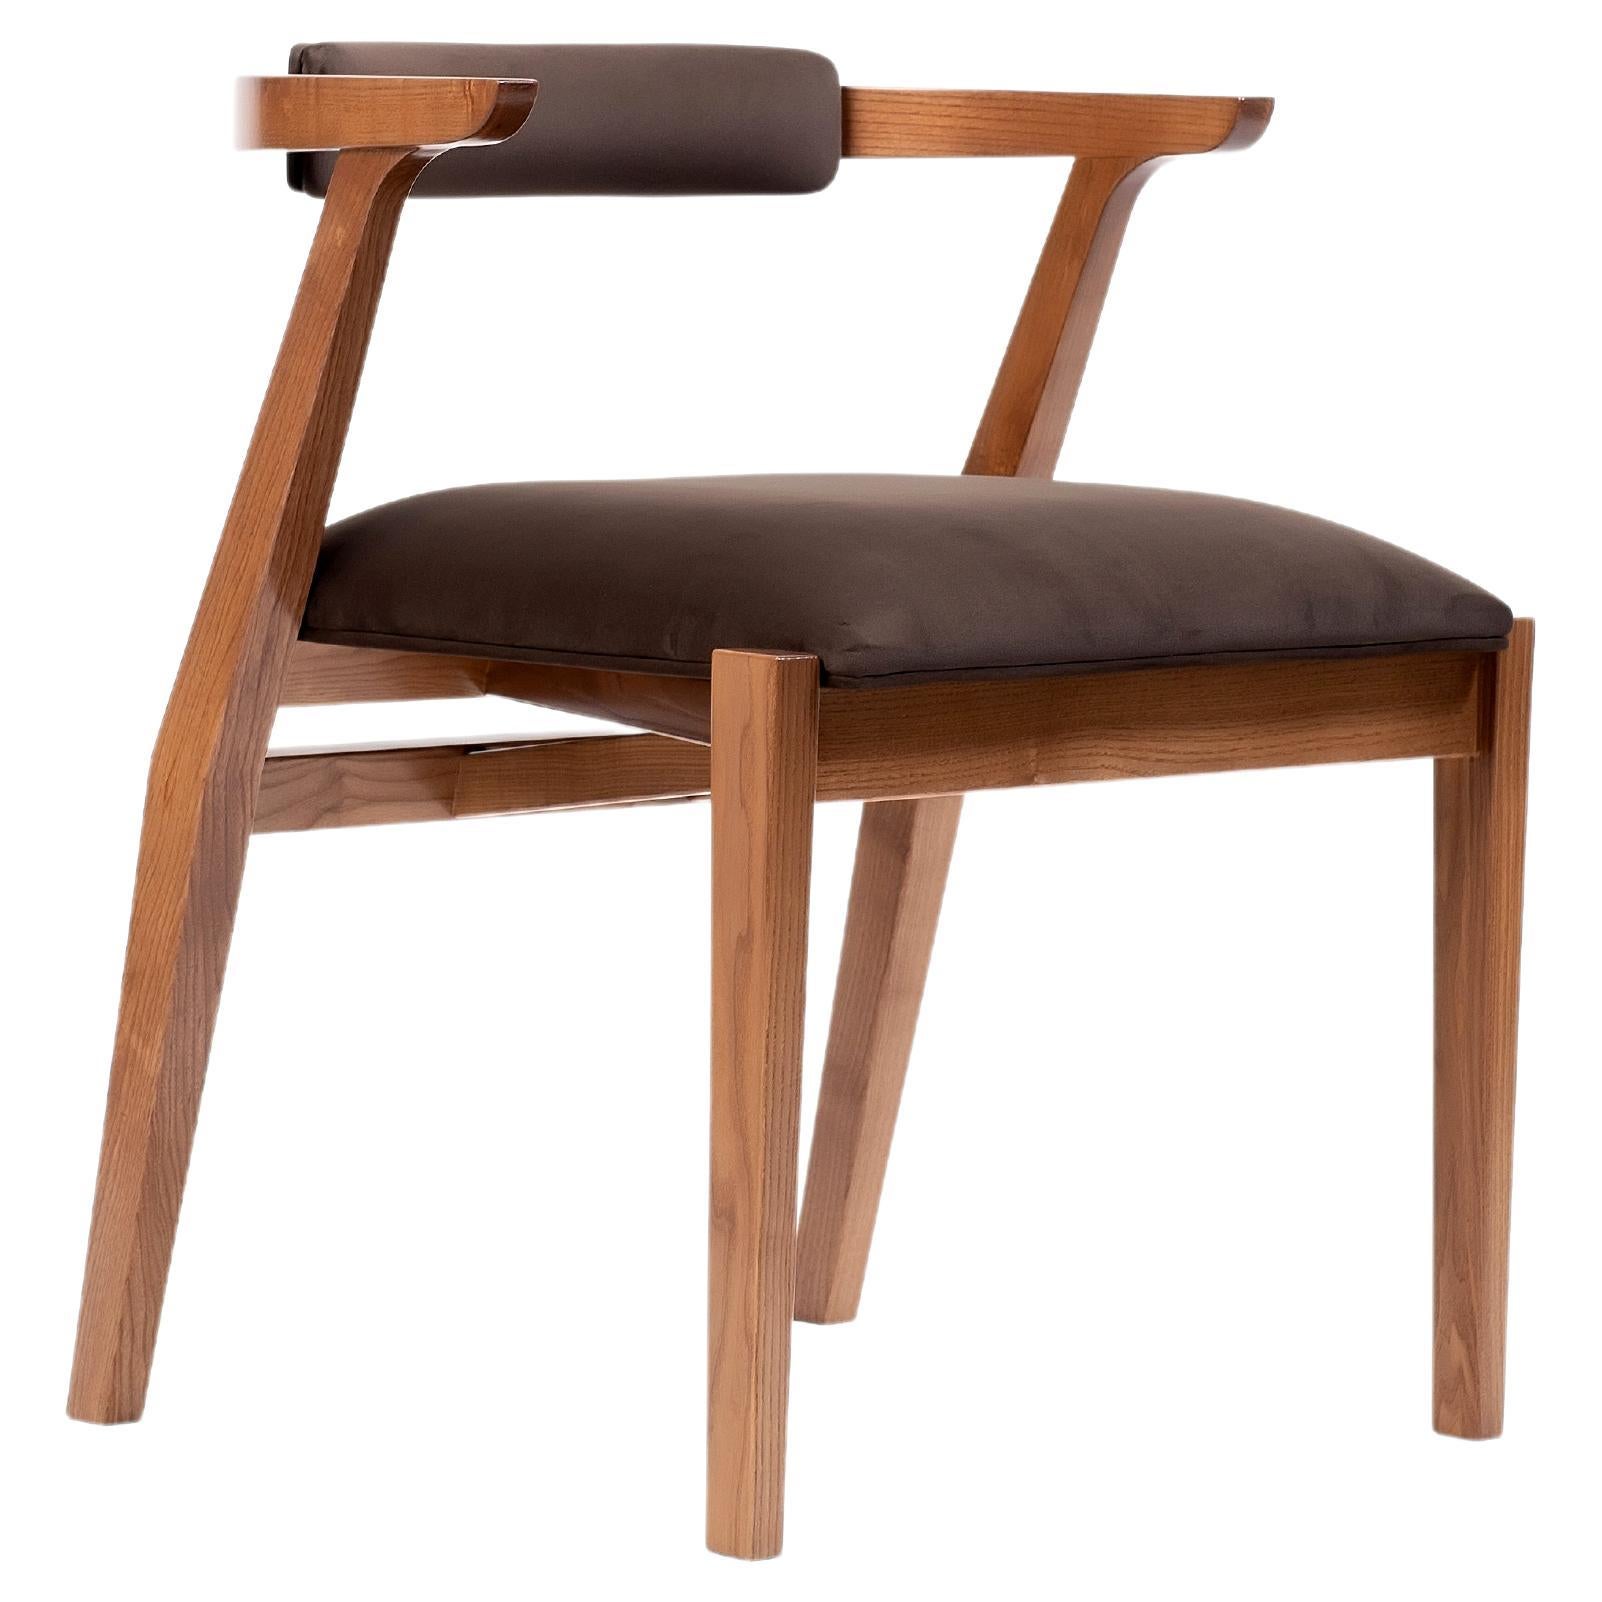 Modern Dining Room Chairs in Solid Wood and Brown Material For Sale